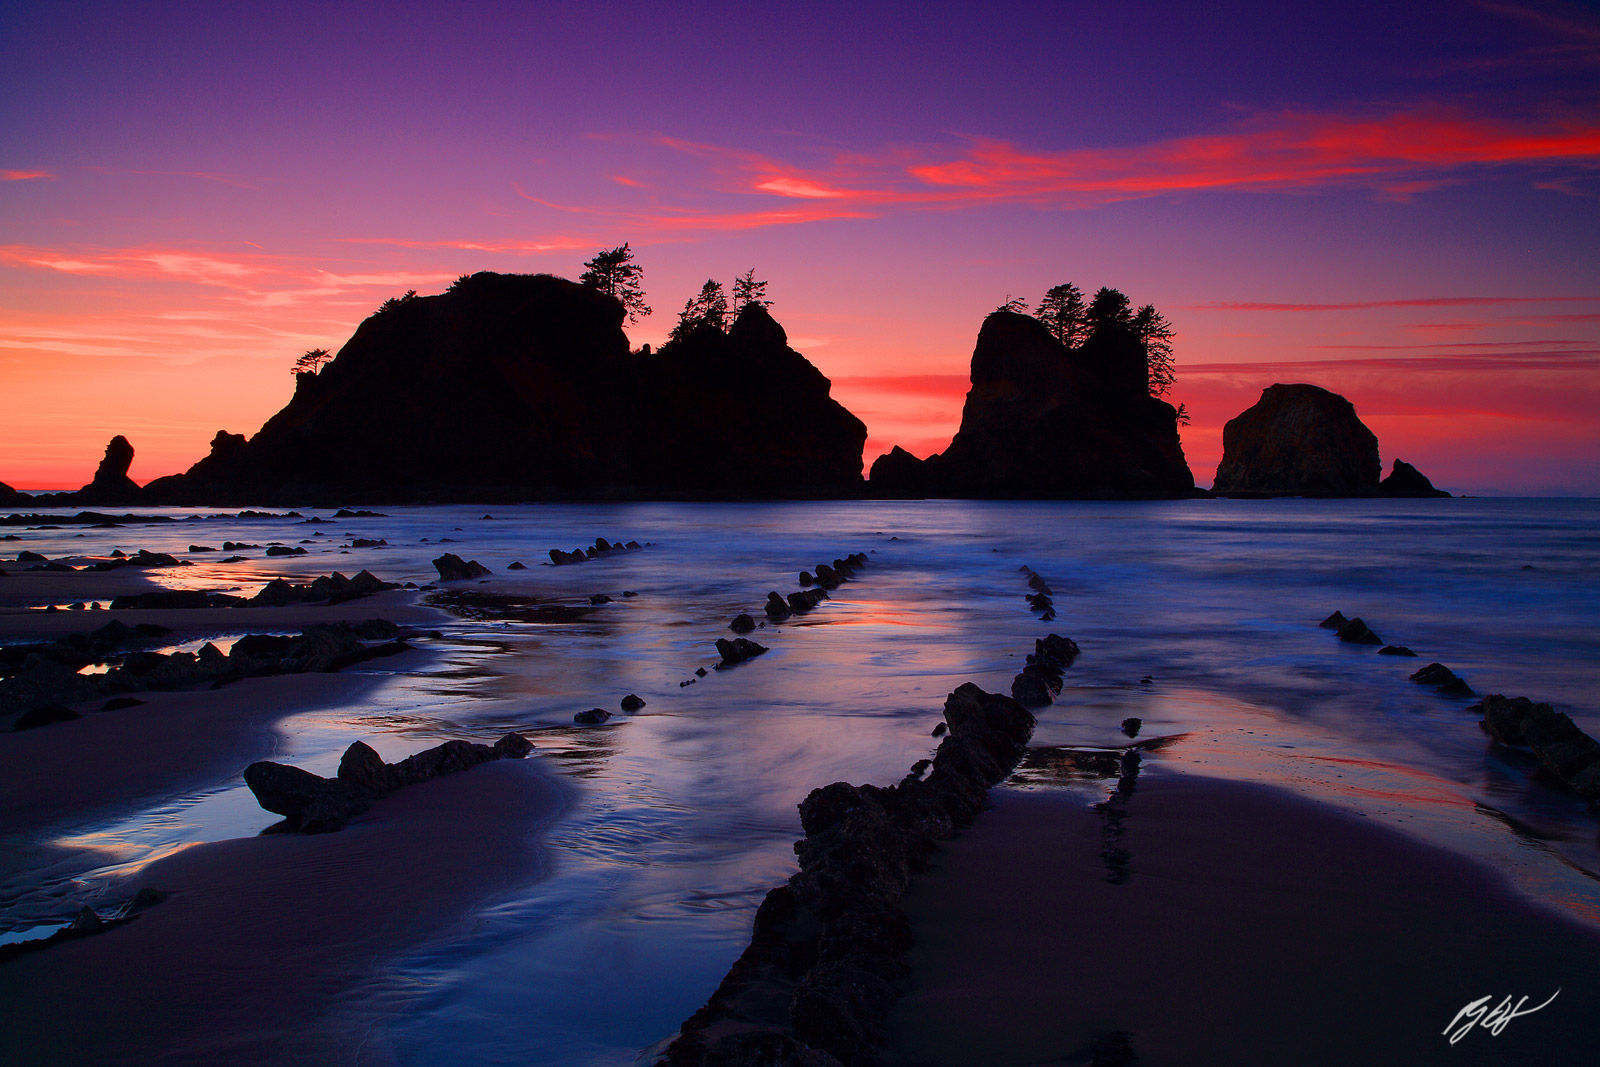 Sunset Alpenglow wit the Point of the Arches on Shi Shi Beach from Olympic National Park in Washington